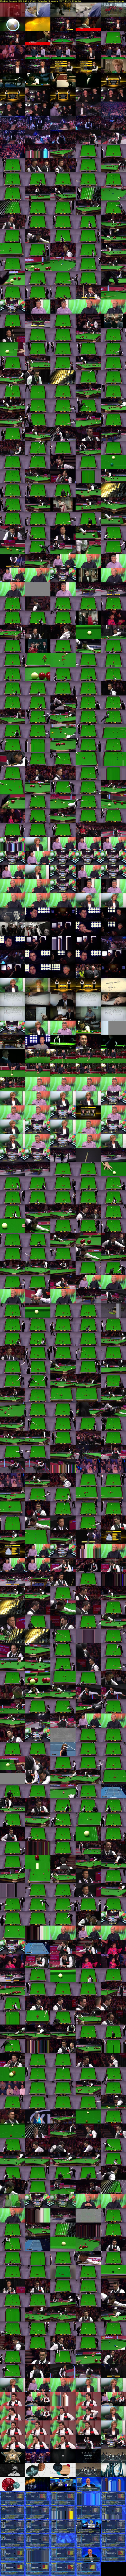 Masters Snooker (BBC ONE N West) Saturday 21 January 2017 13:15 - 16:30